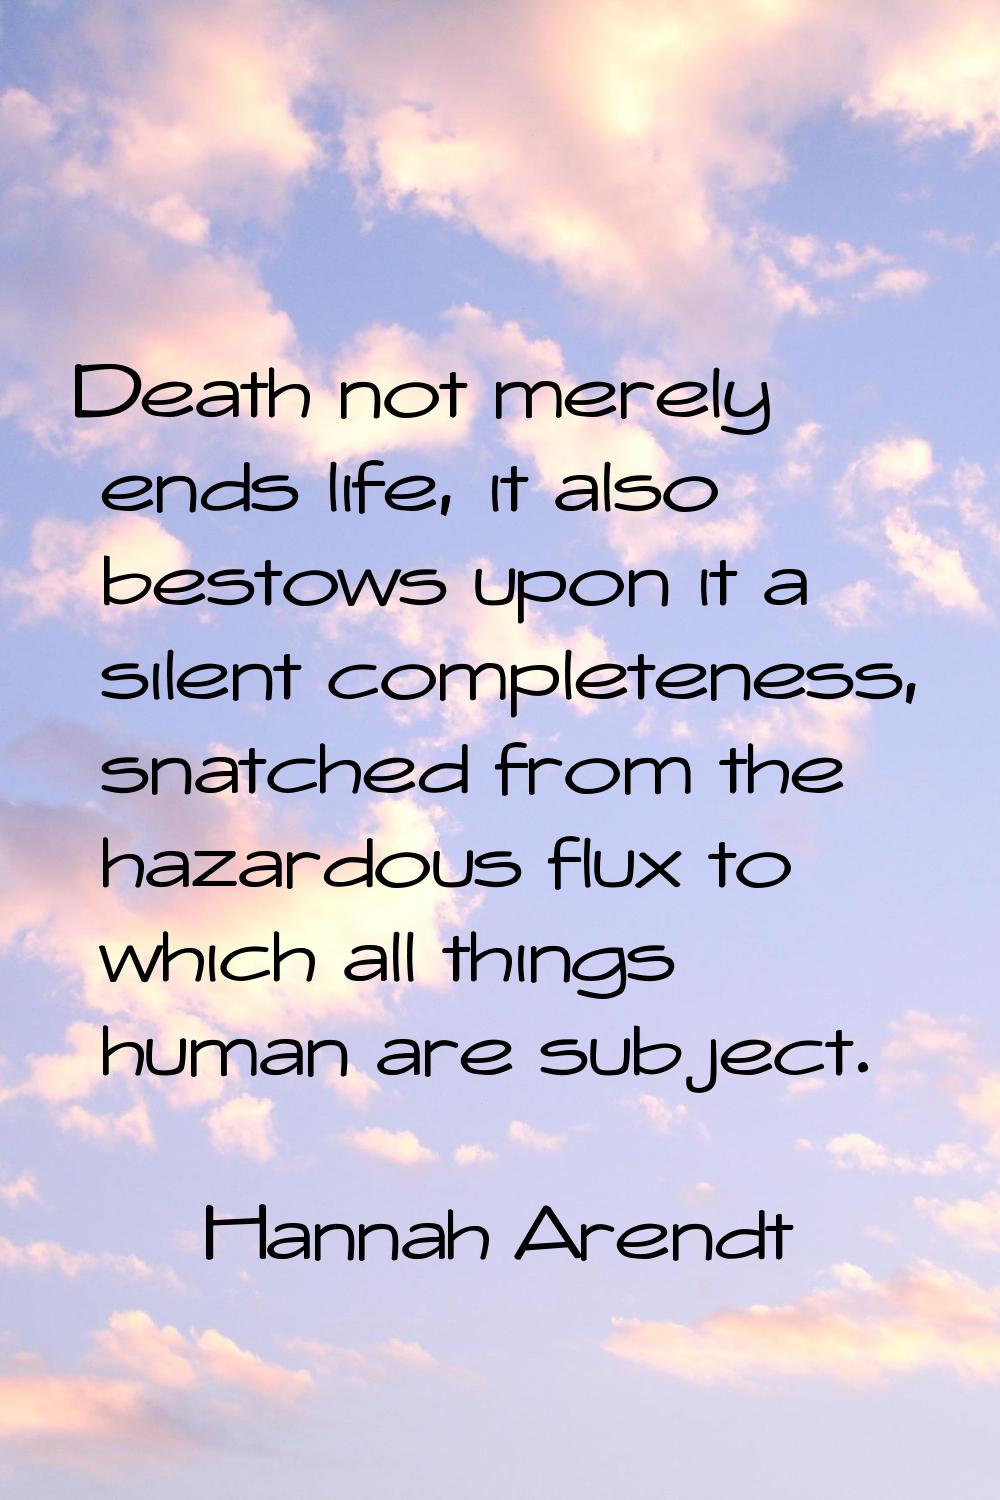 Death not merely ends life, it also bestows upon it a silent completeness, snatched from the hazard